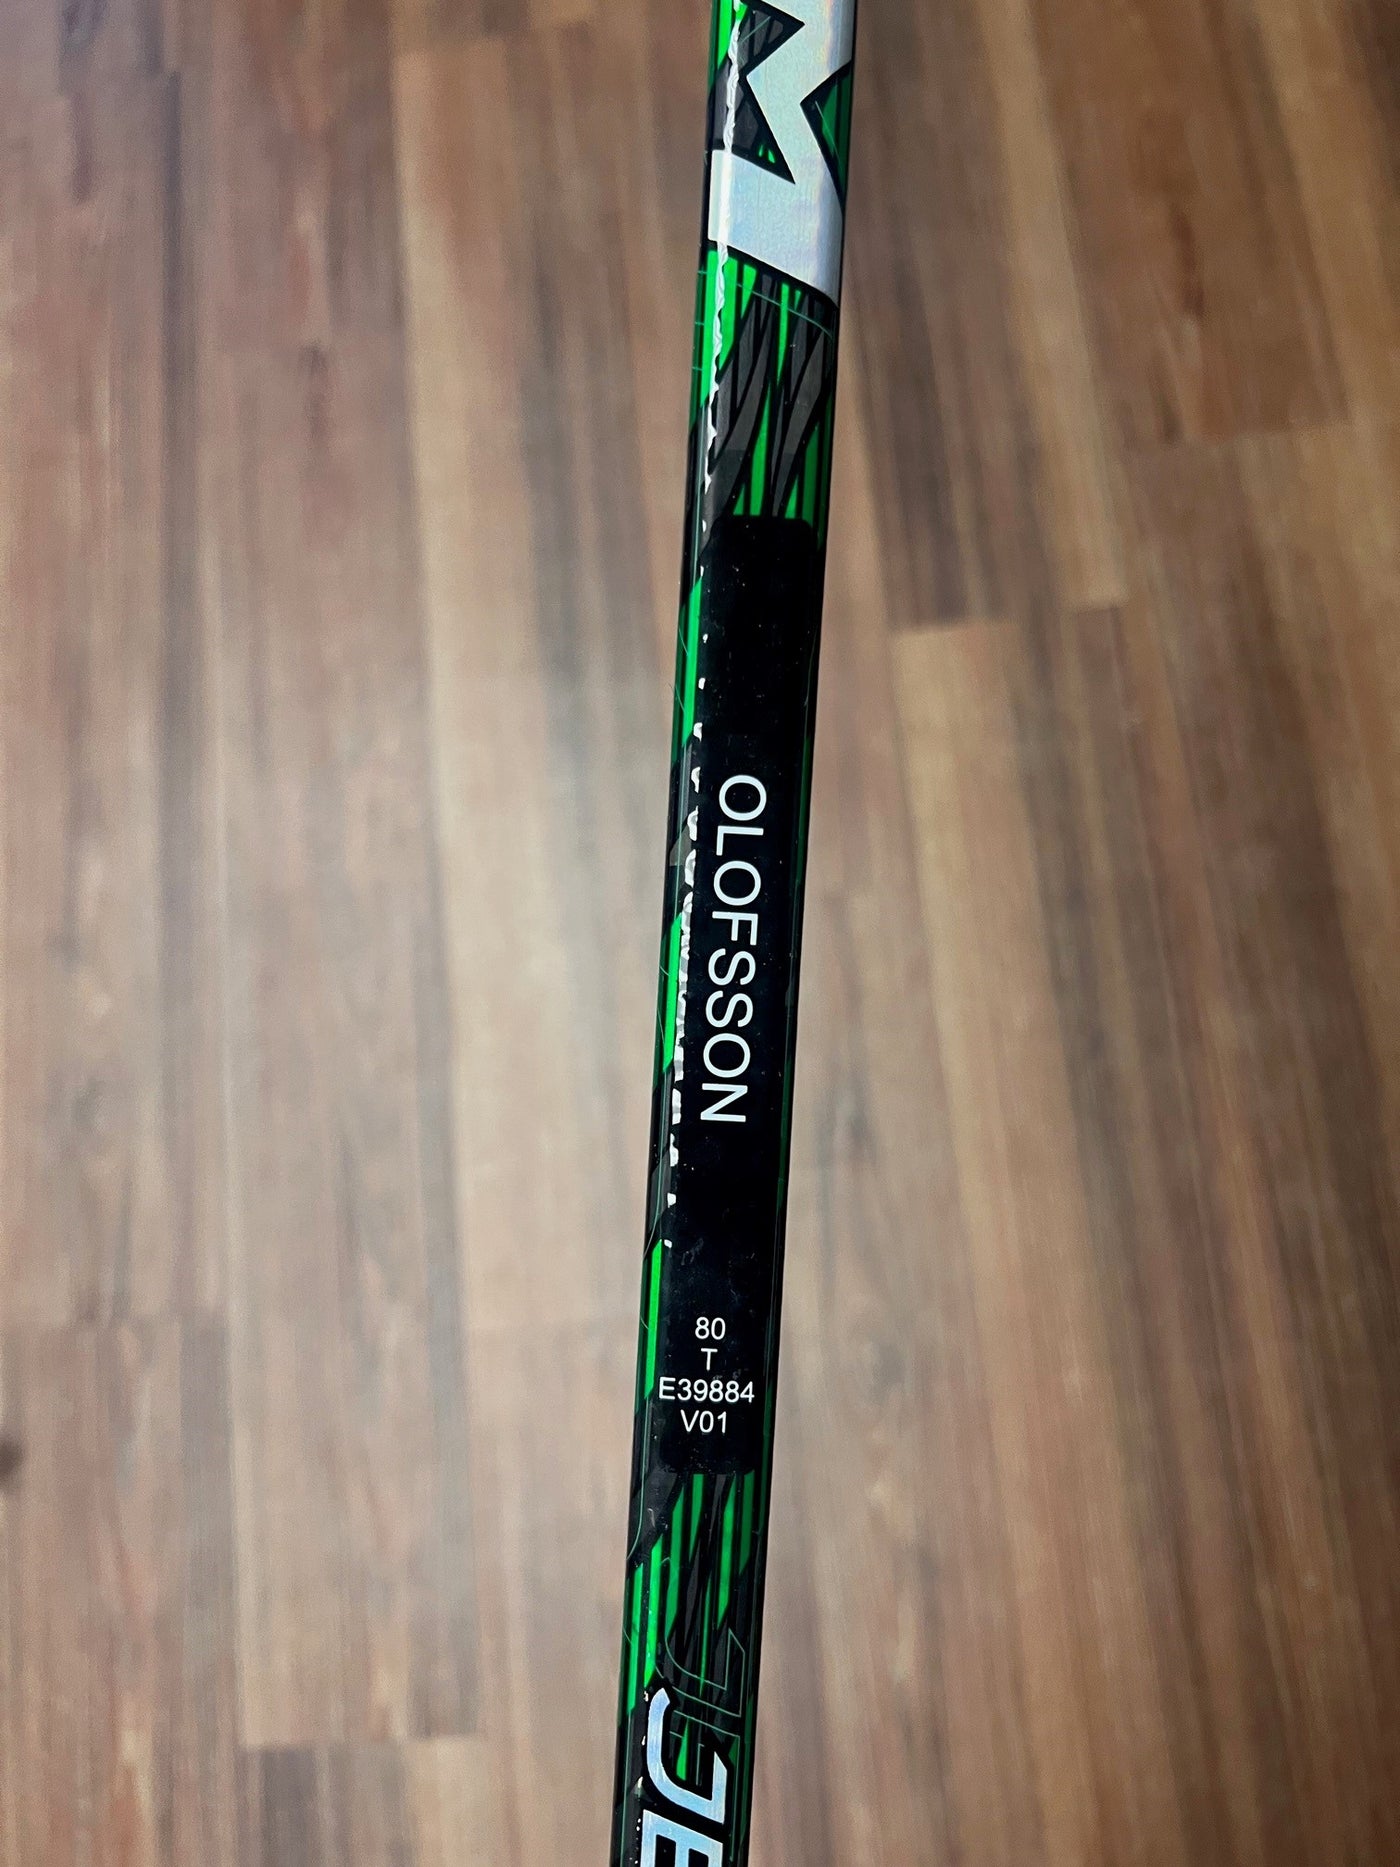 OLOFSSON NEW CCM TEAM ISSUED STICK - View of name on stick